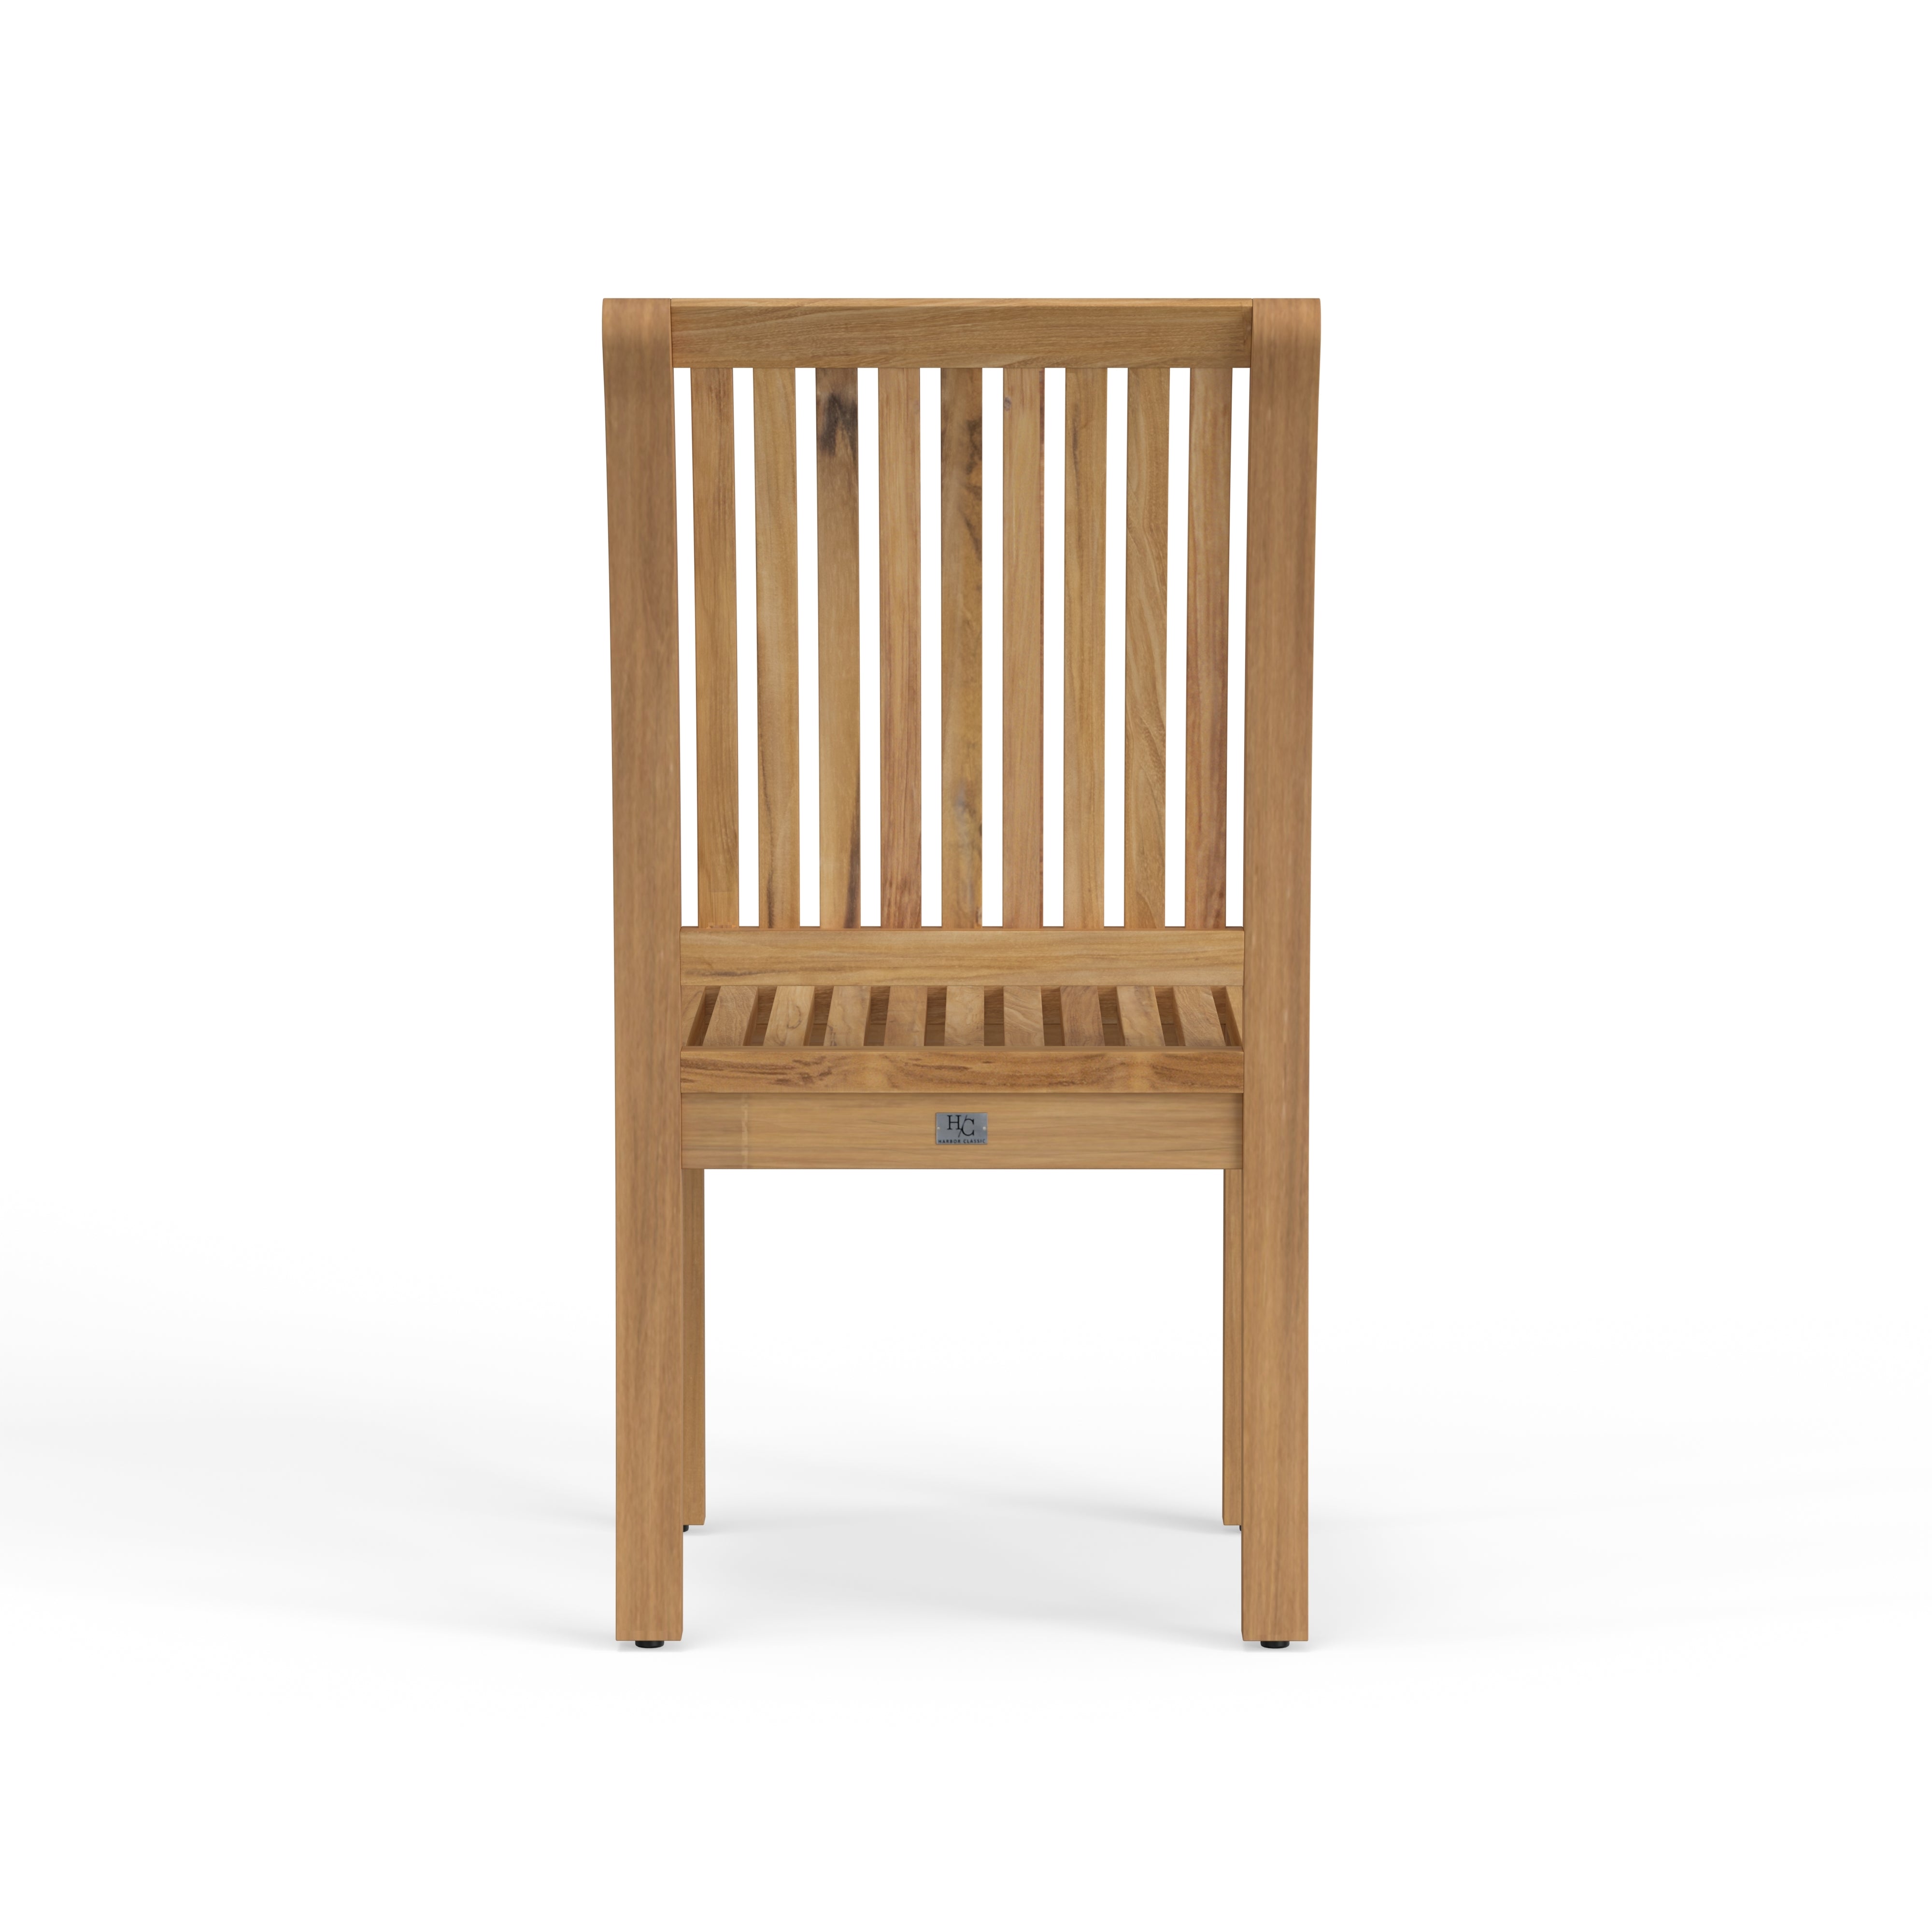 Handcrafted Grade-A Teak Outdoor Dining Chair